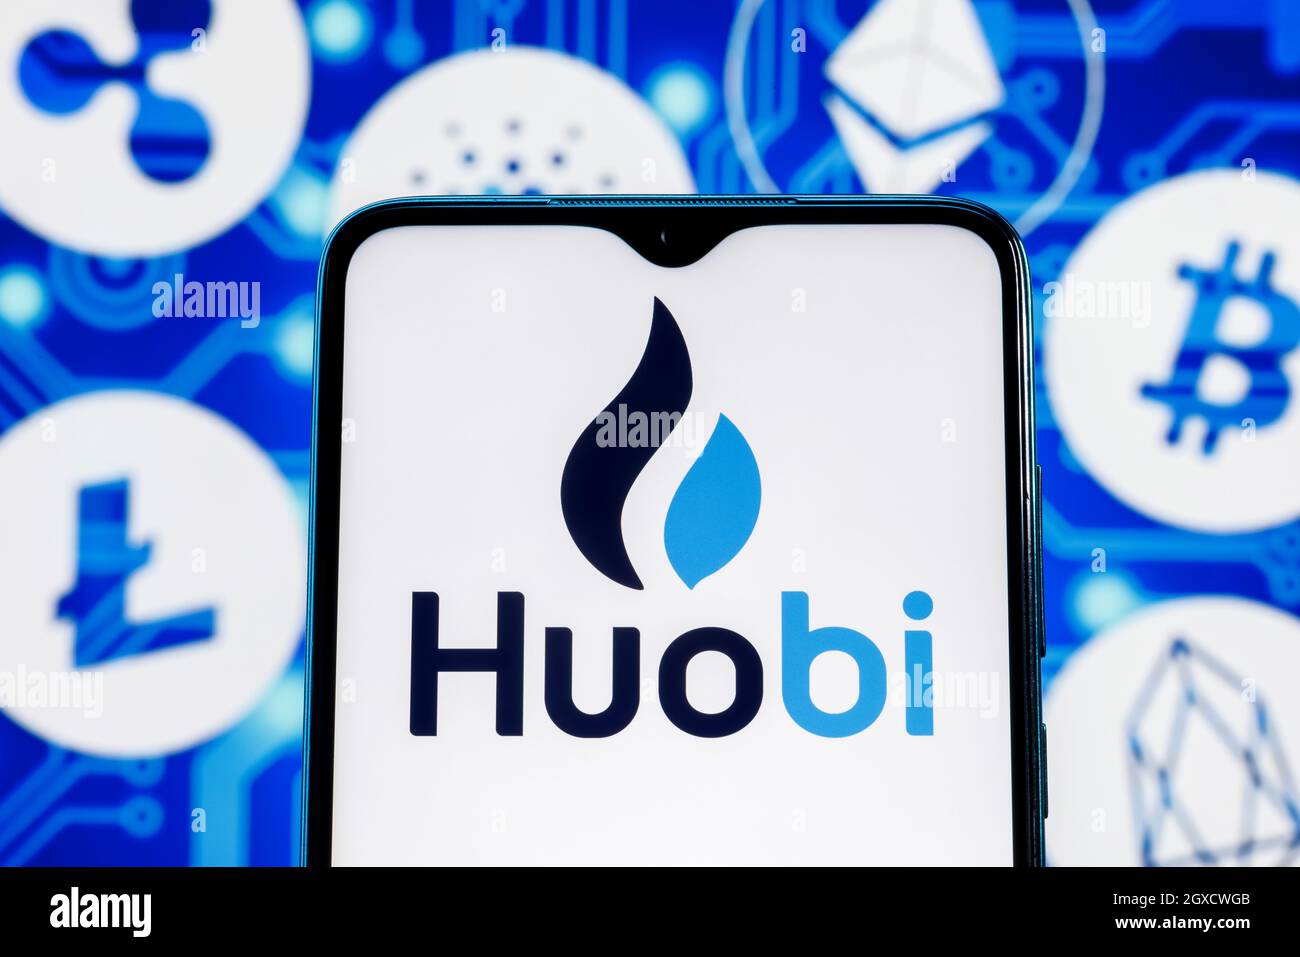 Huobi is a cryptocurrency exchange. Huobi logo on smartphone screen against the background of the main cryptocurrencies. Stock Photo